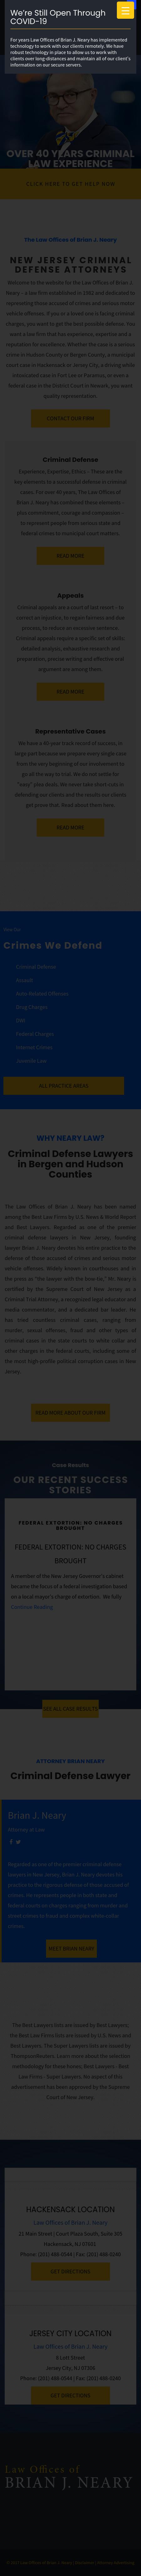 Law Offices of Brian J. Neary - Hackensack NJ Lawyers